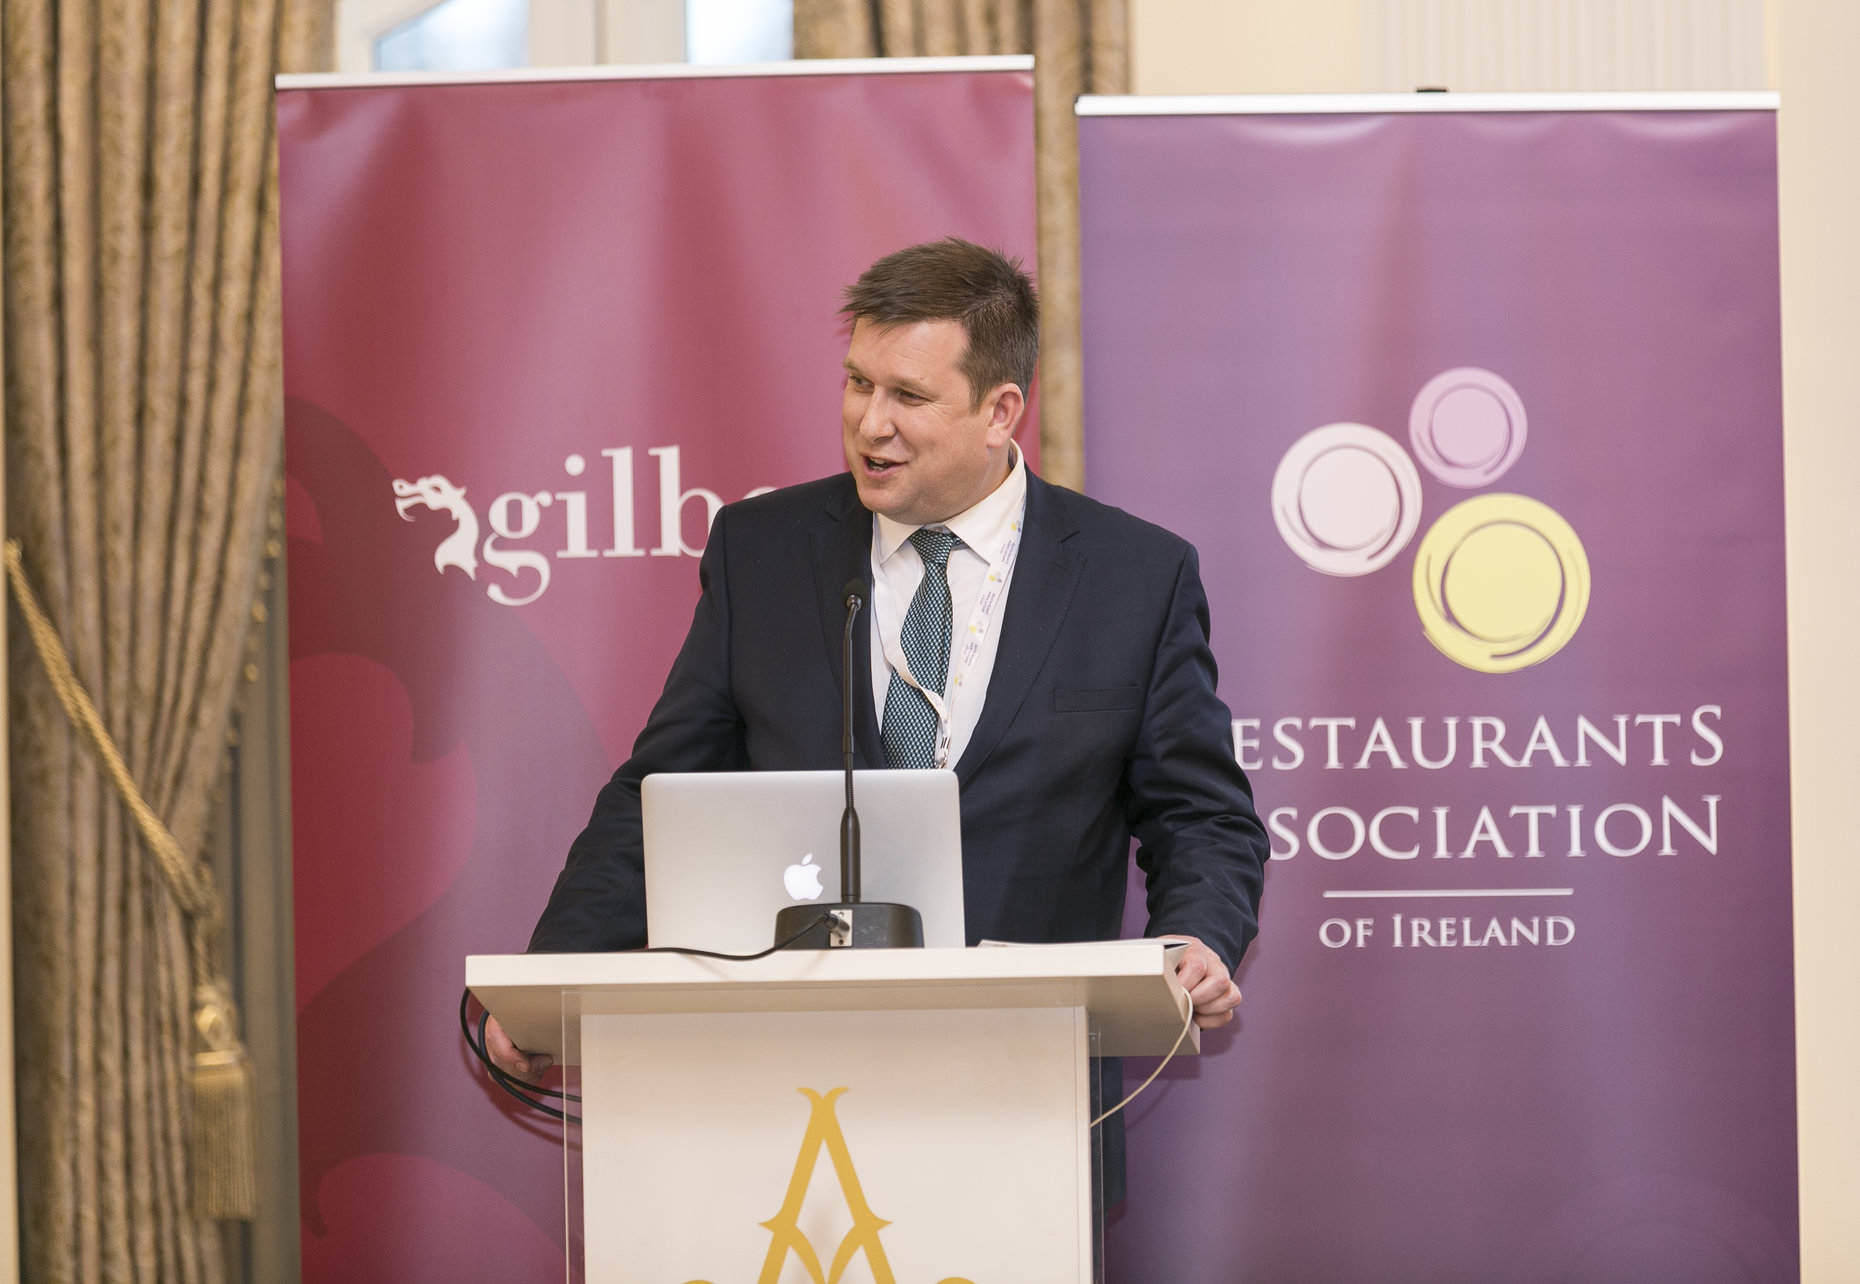 “The hospitality industry in Ireland has been under significant strain in recent years in regard to staffing and allowing more skilled professionals to enter the industry can only encourage further growth in this sector,” commented RAI Chief Executive Adrian Cummins.